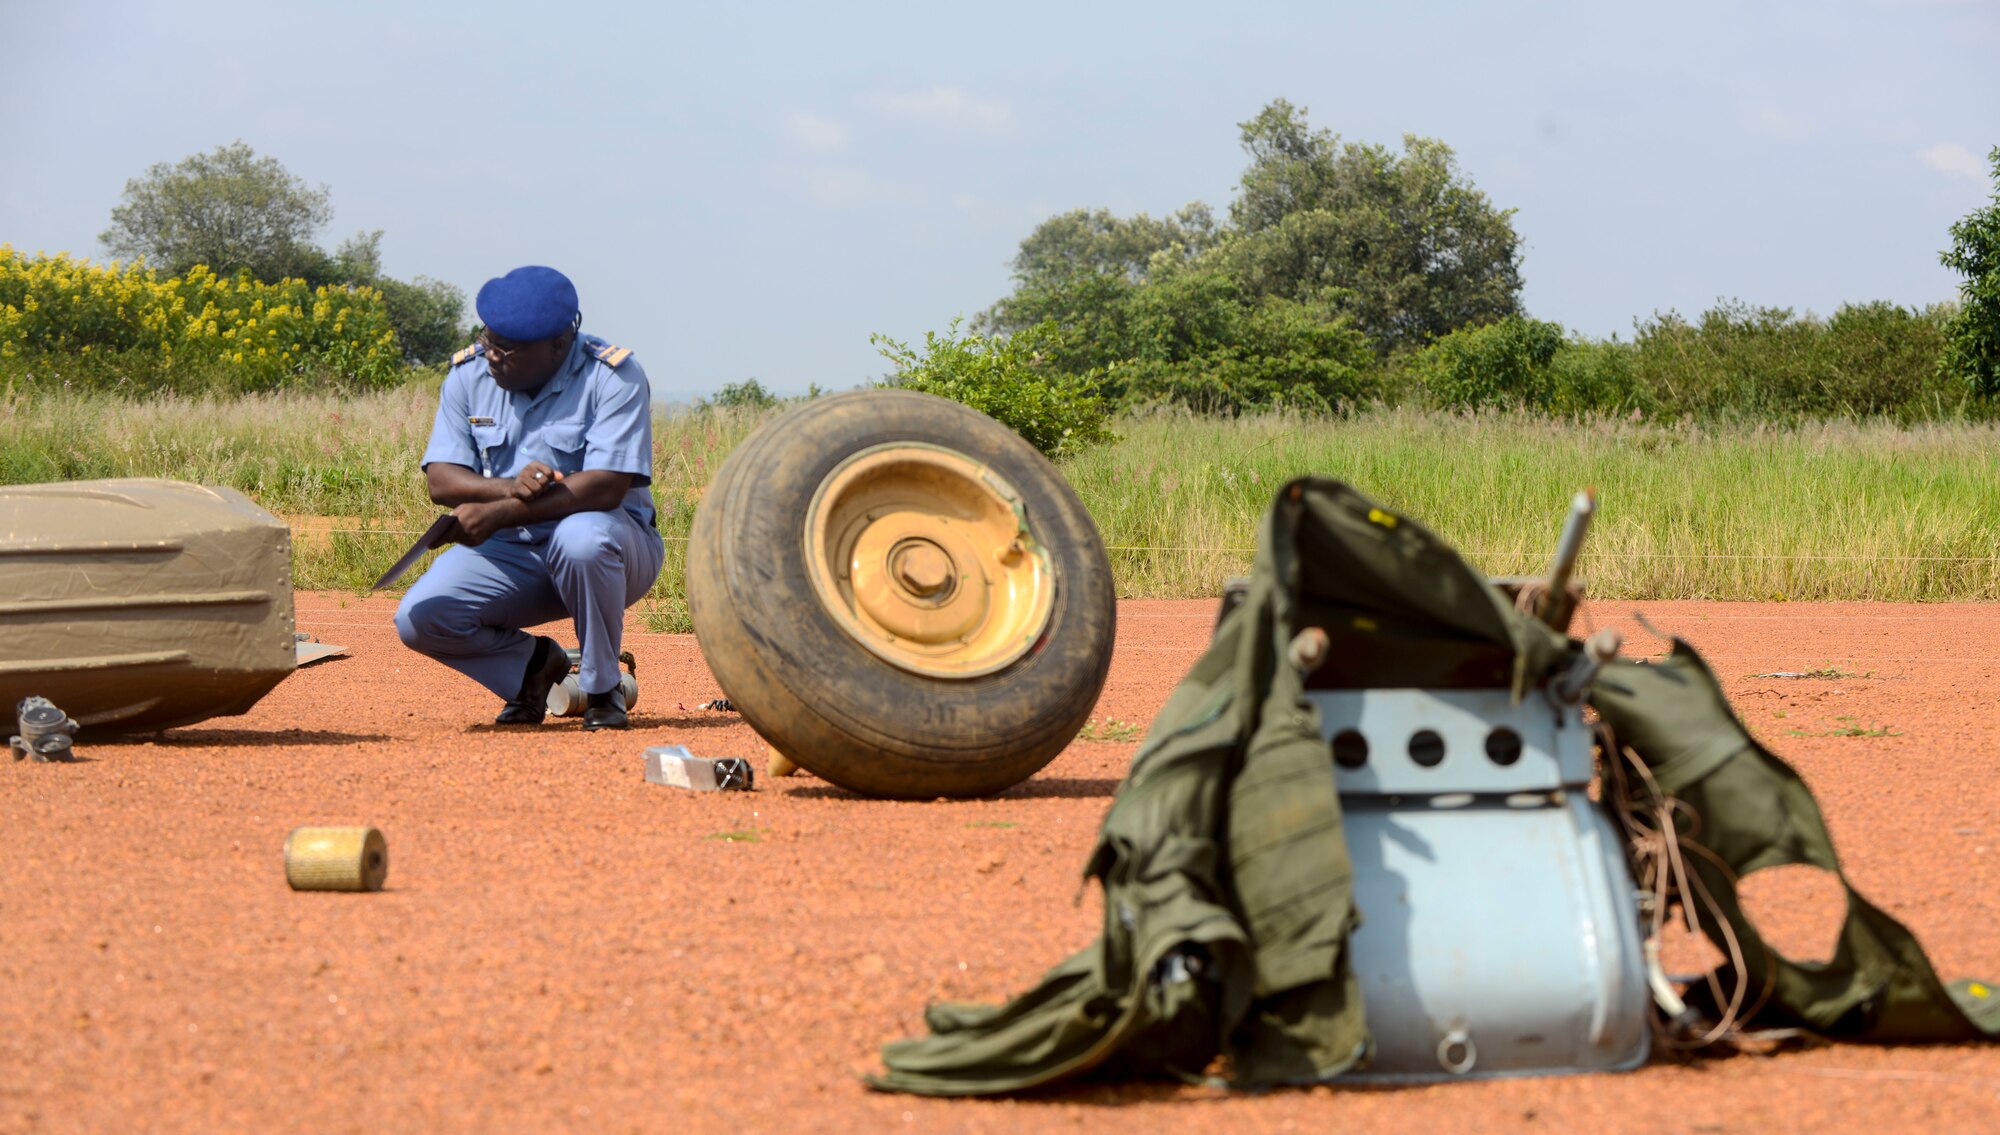 Cameroon Air Force Maj. Daniel Ohandja investigates an aircraft part during the African Partnership Flight Rwanda field familiarization exercise at the Rwanda Military Academy in Gako, Rwanda, March 7, 2019. Throughout the weeklong African Partnership Flight, participants discussed various aspects of safety, with each country discussing how they conduct their programs, culminating with teams investigating a simulated aircraft crash in the field familiarization exercise. (U.S. Air Force photo by Tech. Sgt. Timothy Moore)